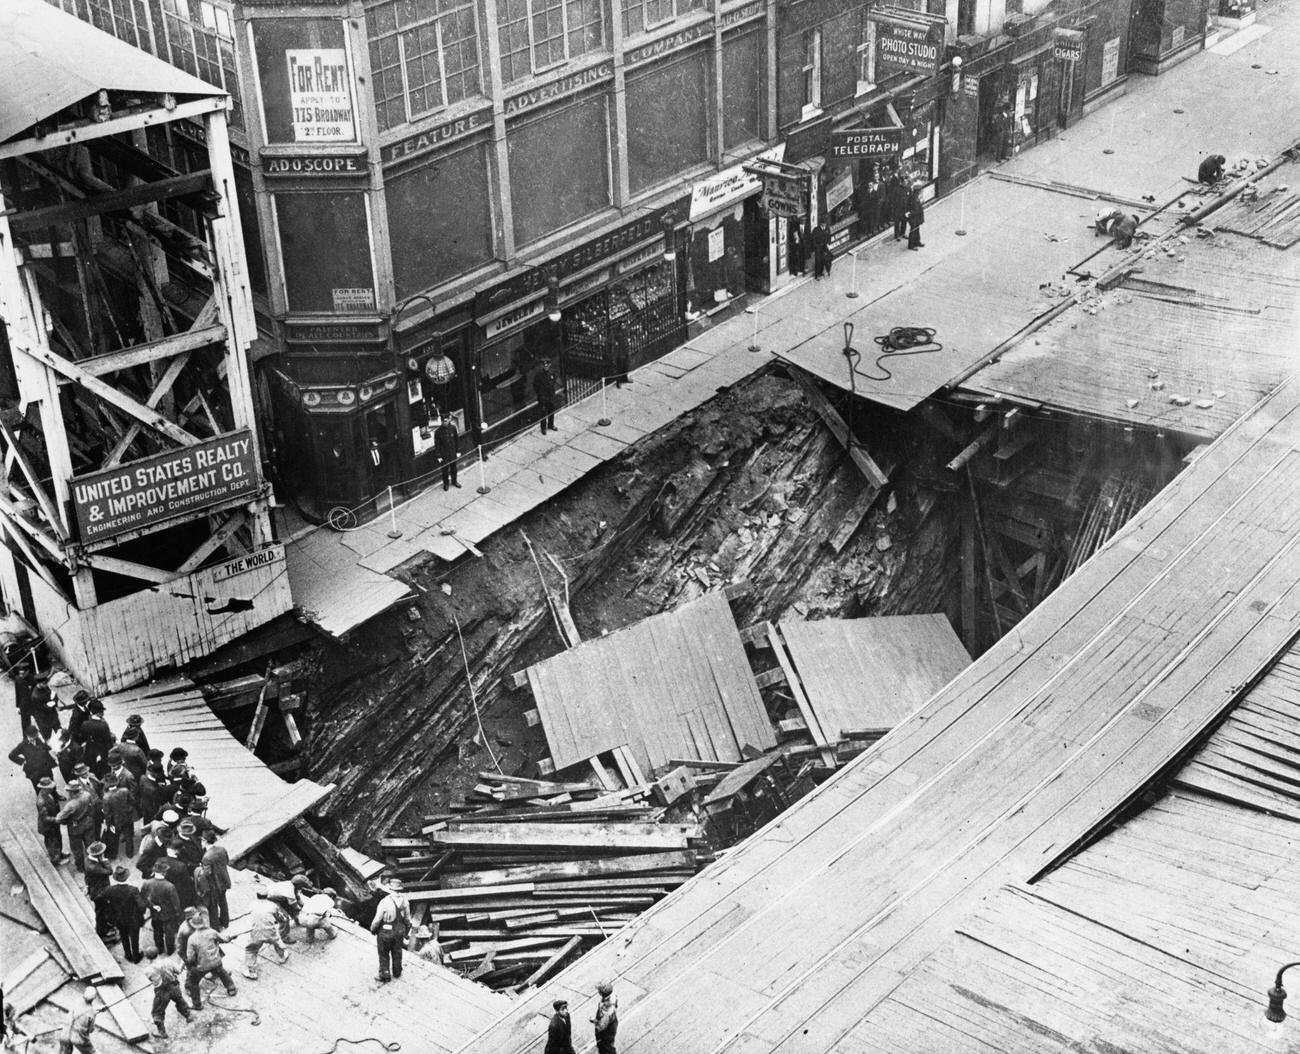 4Th Avenue Subway Construction Collapse In Brooklyn, September 1915